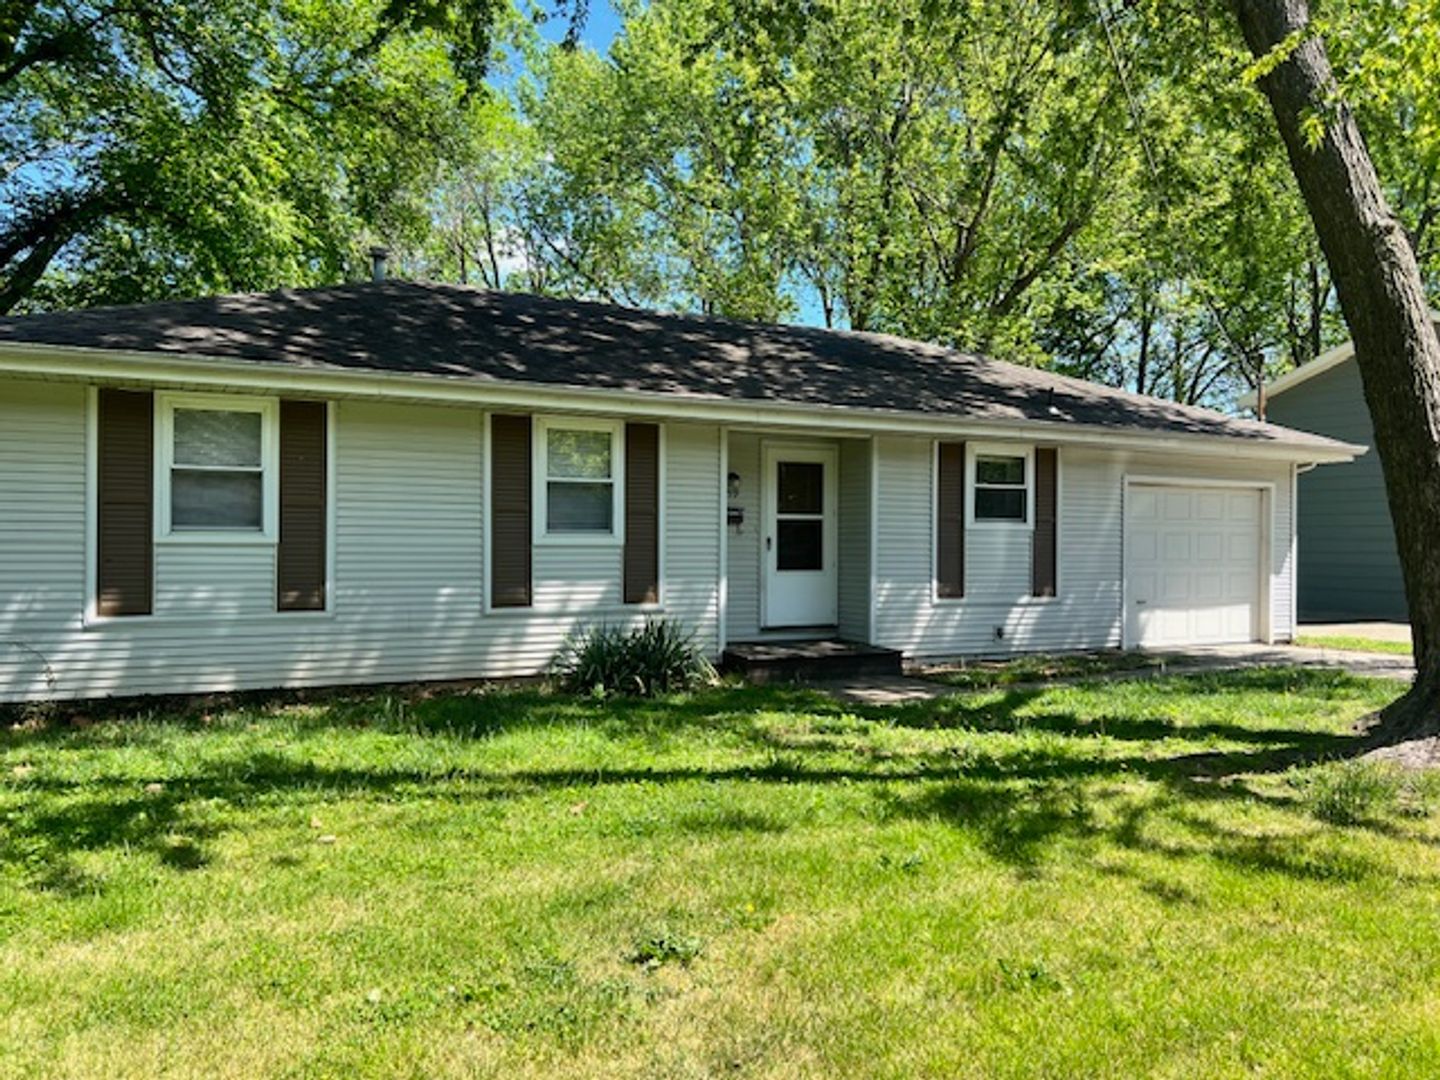 Updated 3 bedroom home near Bass Pro